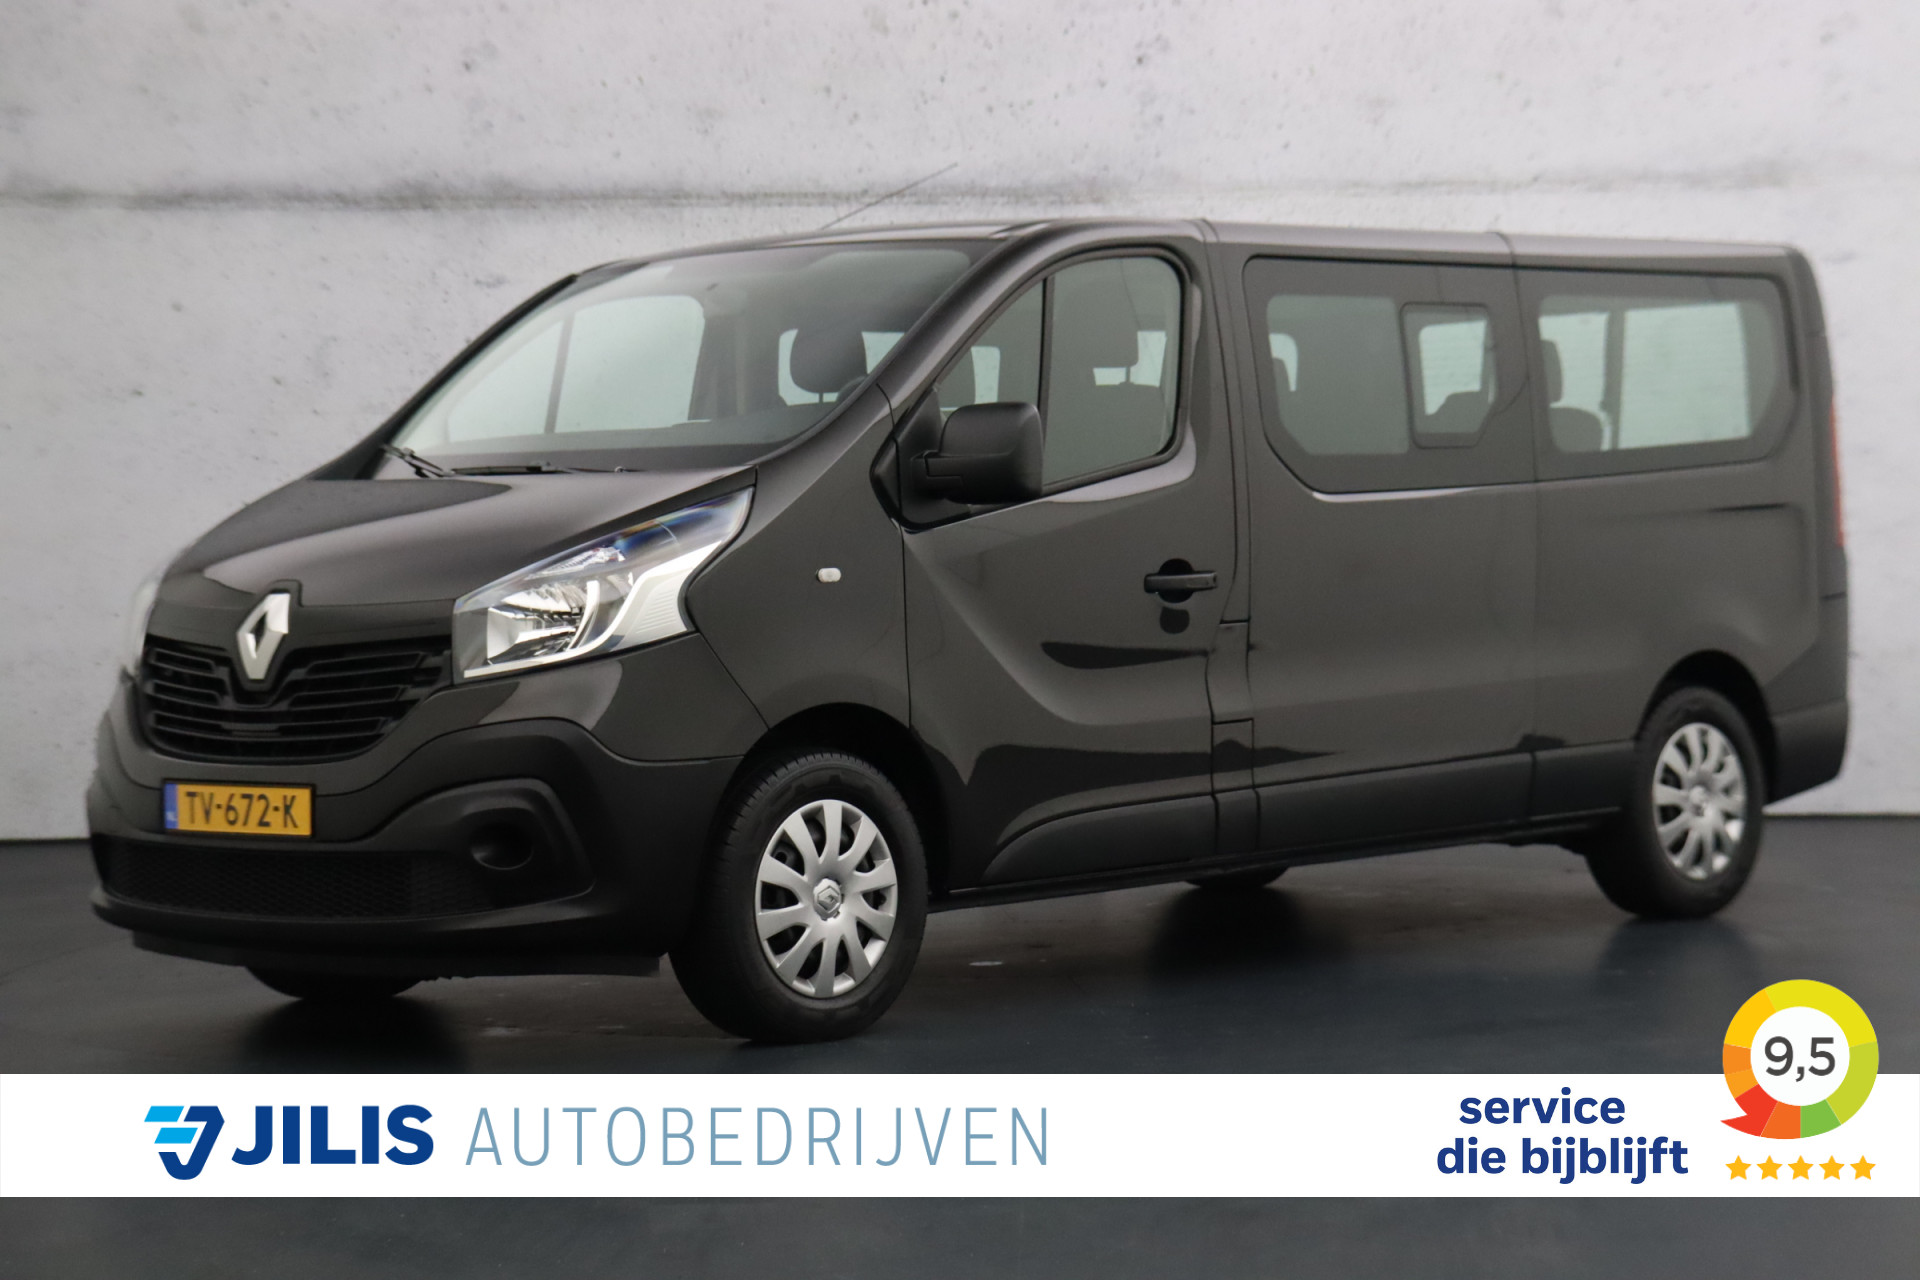 Renault Trafic 1.6 dCi 126pk | Incl. BTW/BPM | 9-Persoons | Navigatie | Airco | Cruise control | Isofix bij viaBOVAG.nl